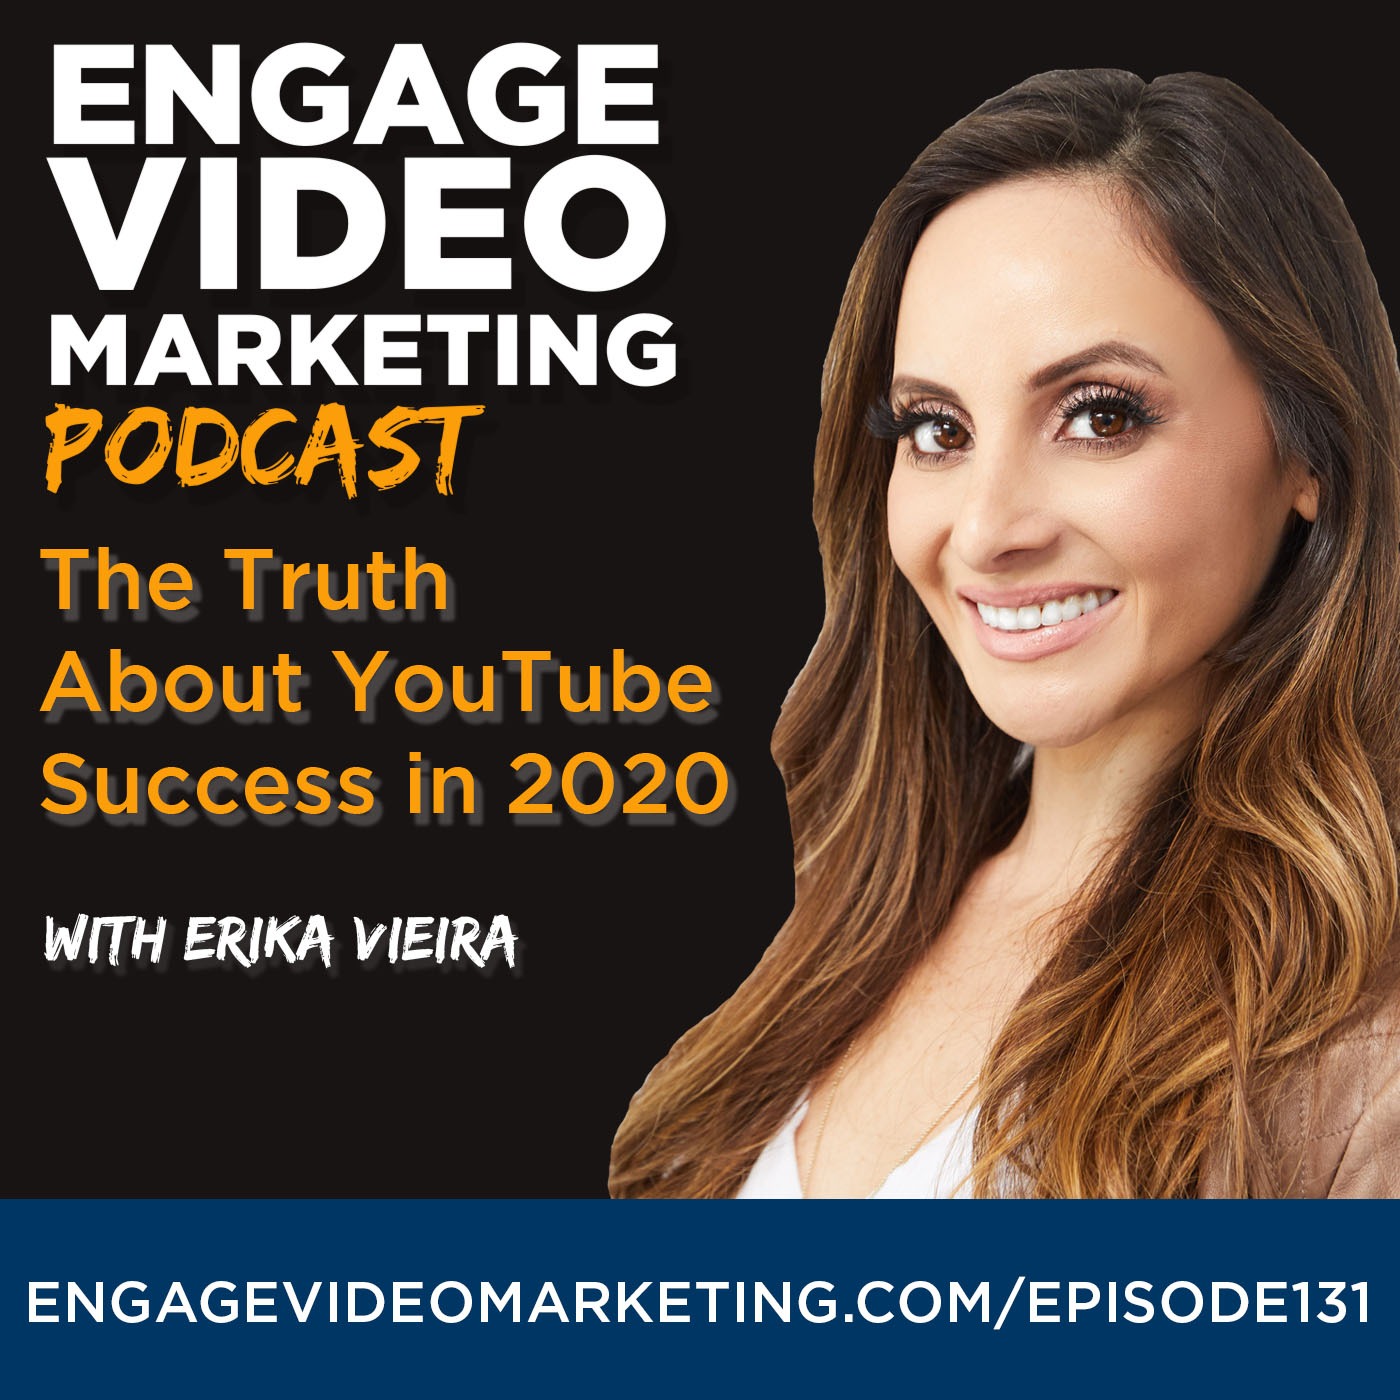 The Truth About YouTube Success in 2020 with Erika Vieira